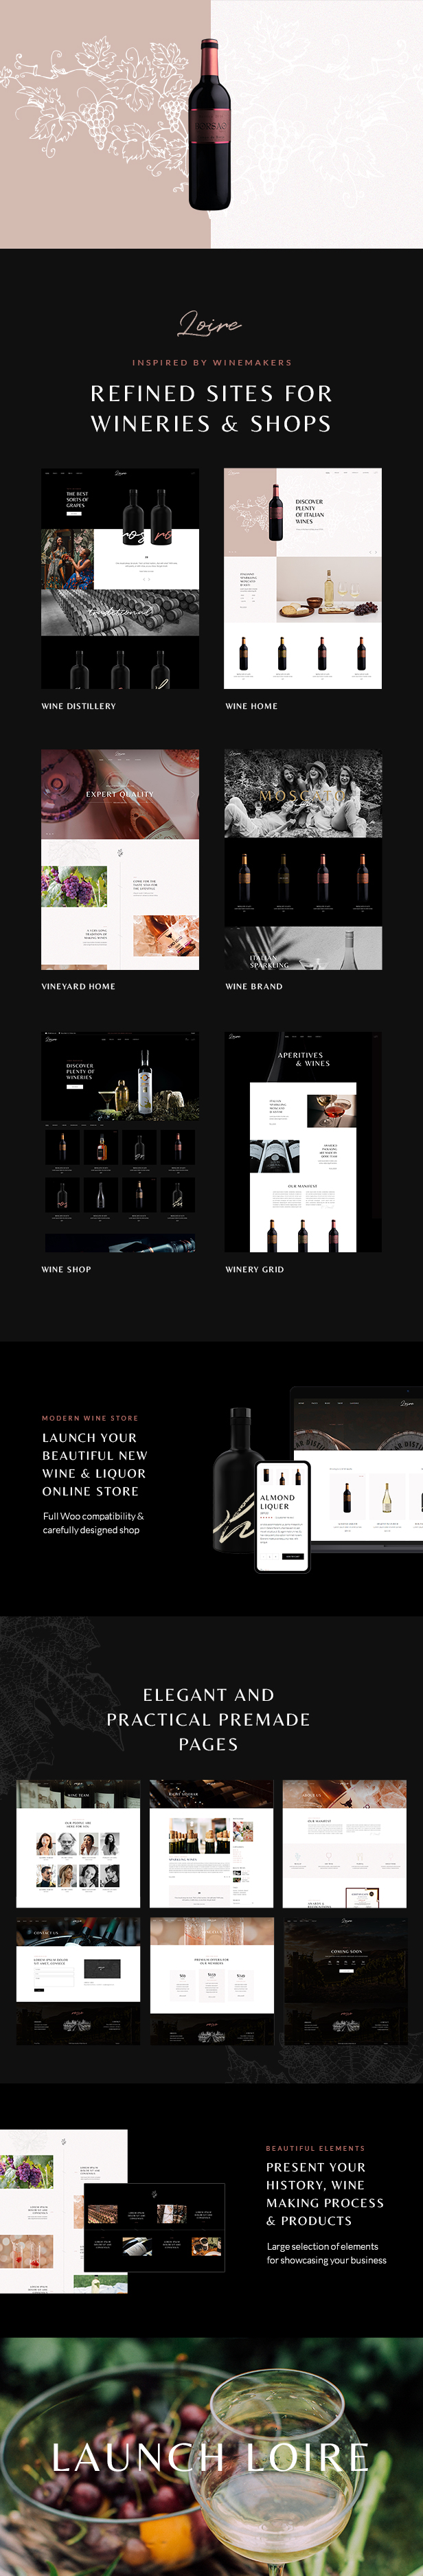 Loire - Winery and Wine Store Theme - 3